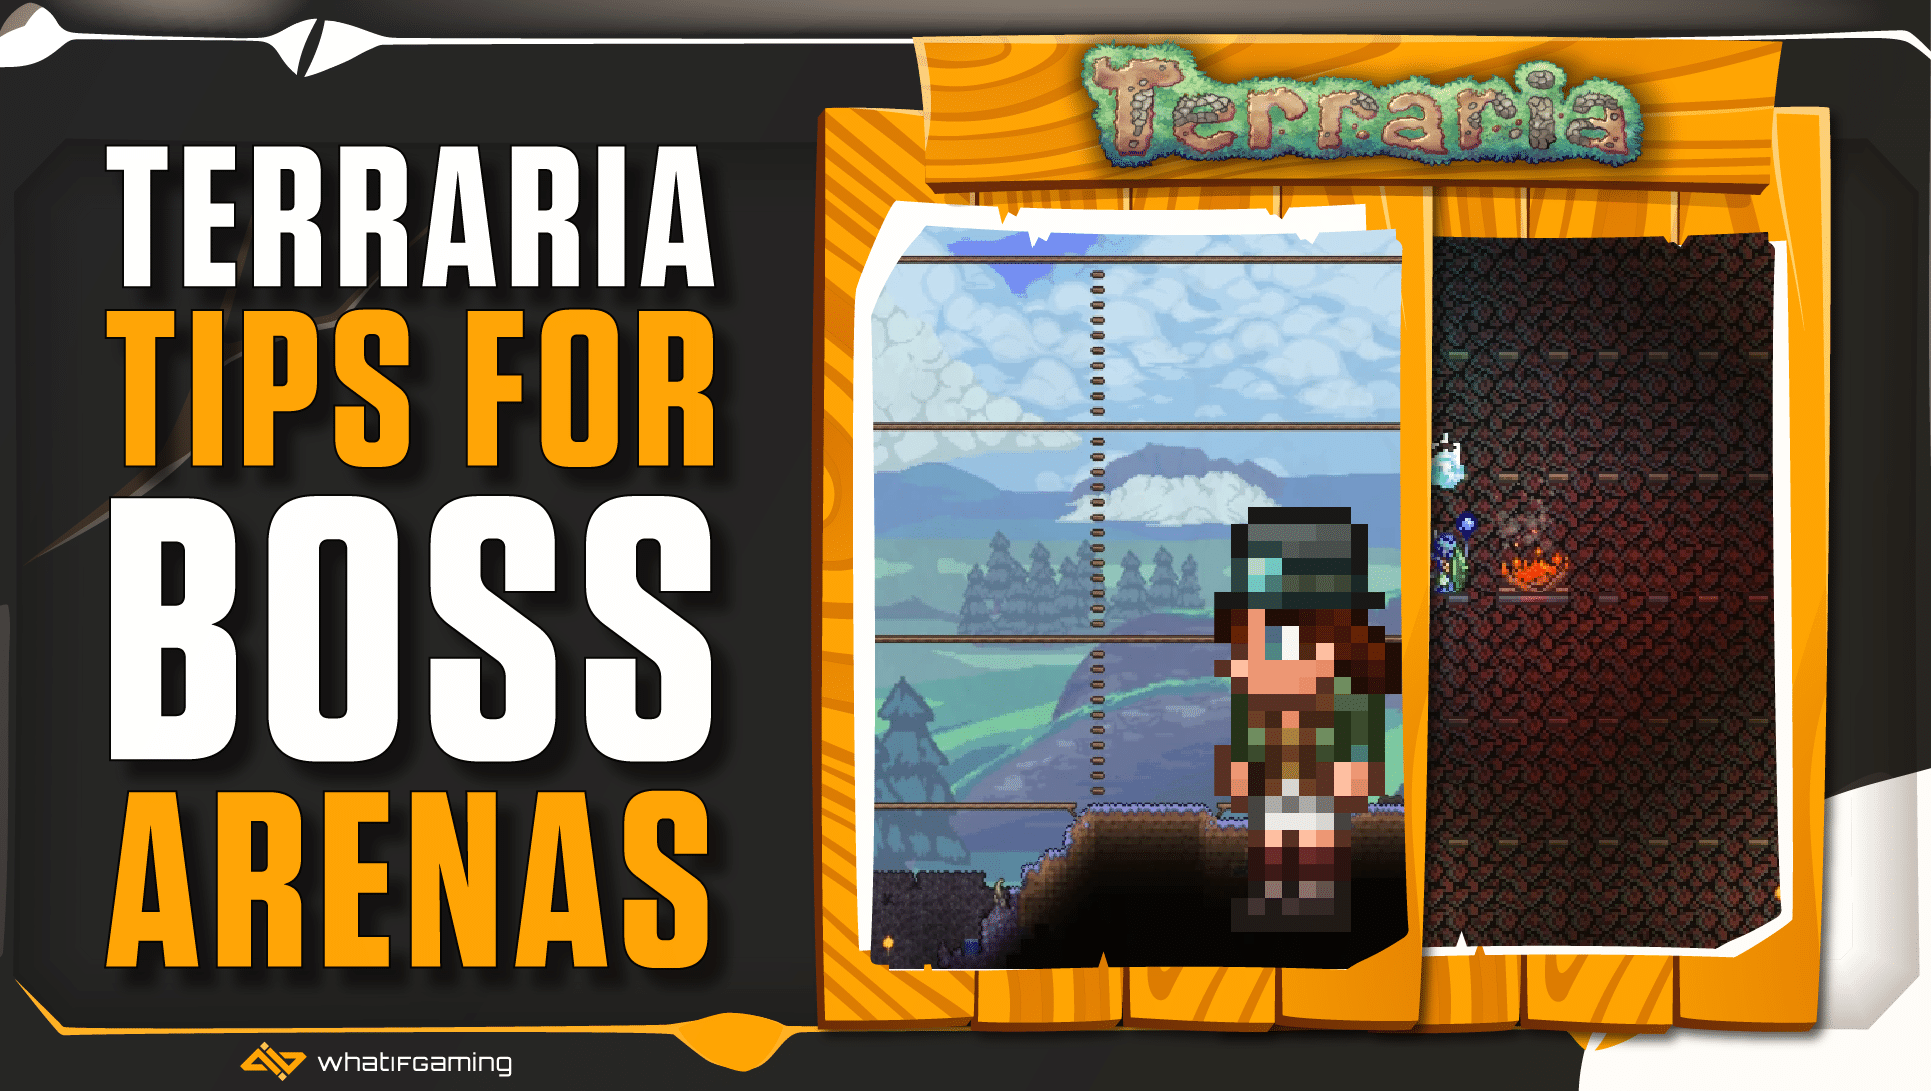 9 Terraria Tips For Boss Arenas (Ranked) - WhatIfGaming